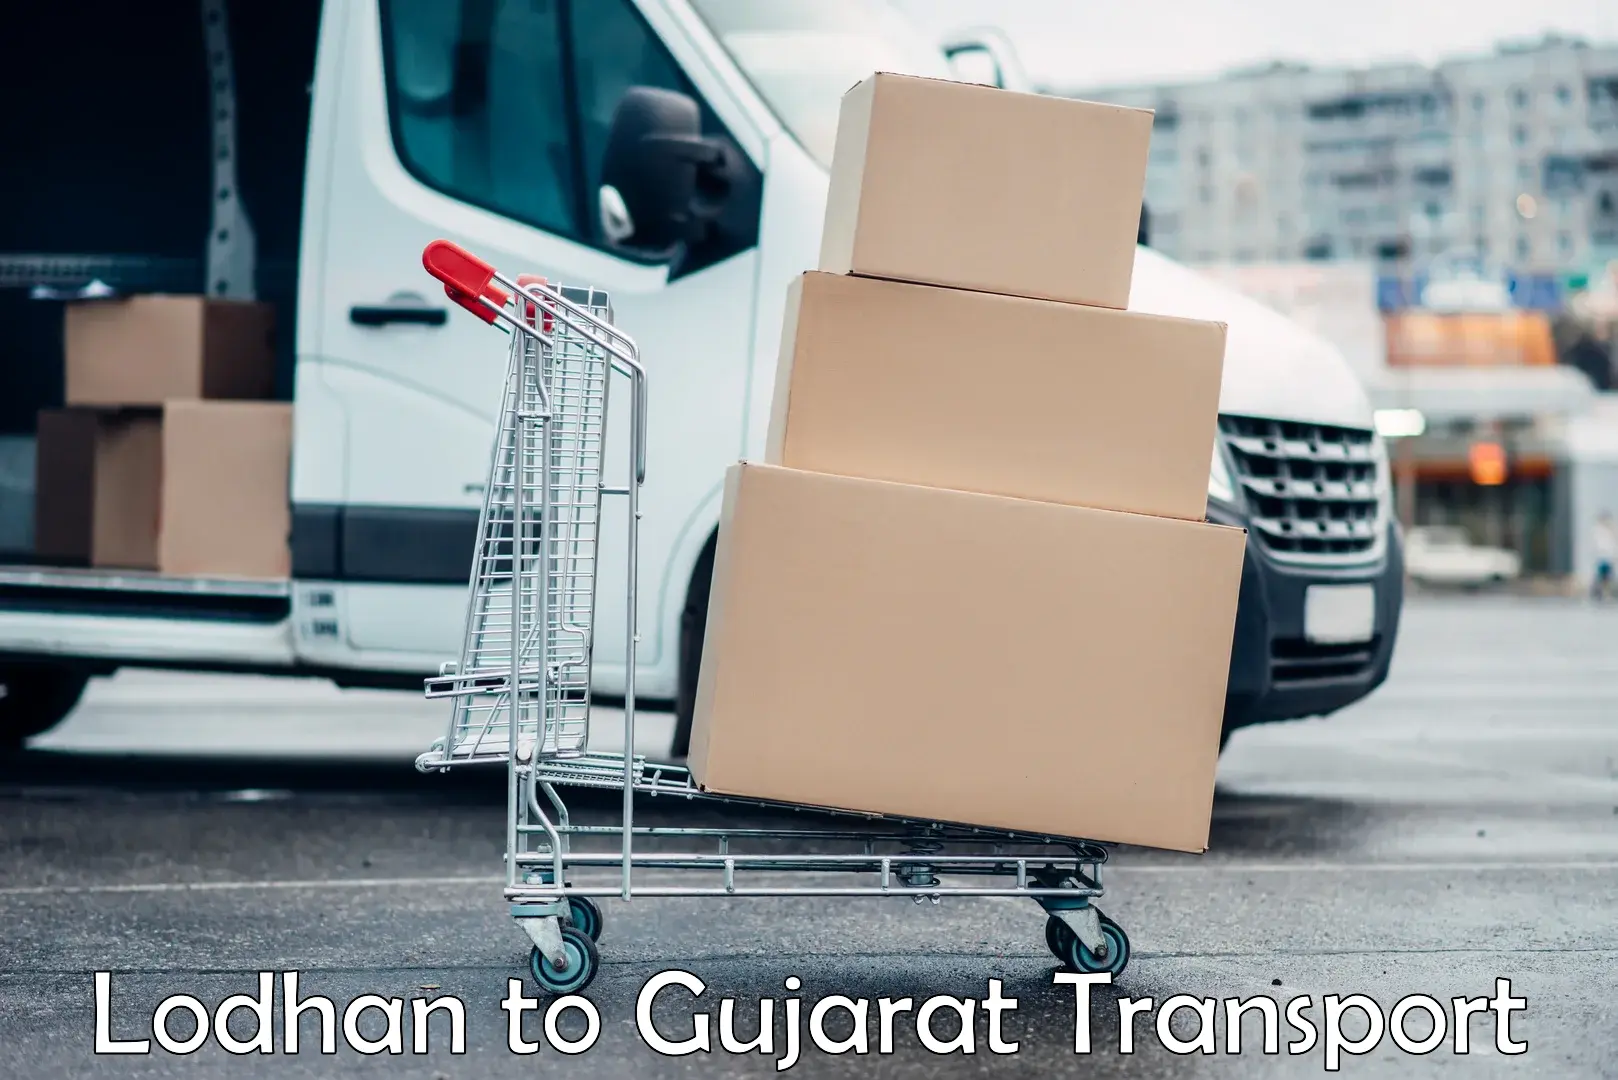 Container transport service Lodhan to Godhra